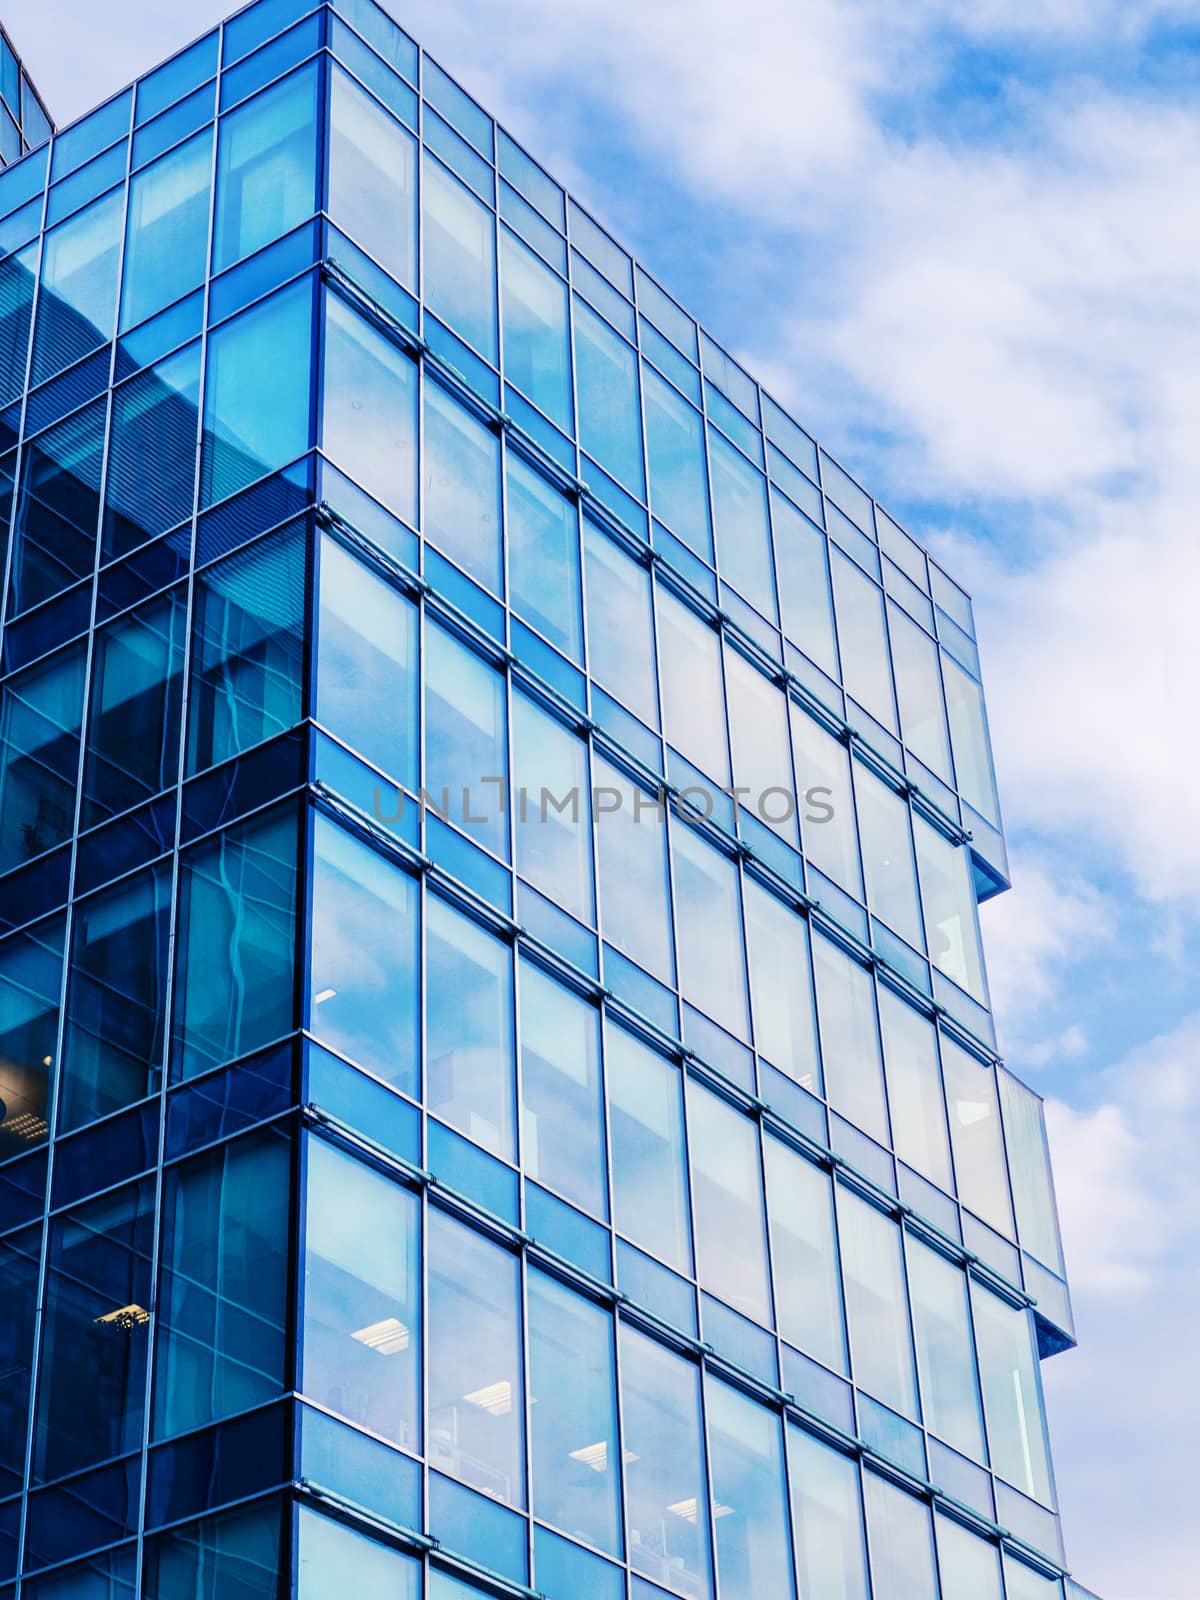 Modern building exterior with copy space. Modern office building with facade of glass.